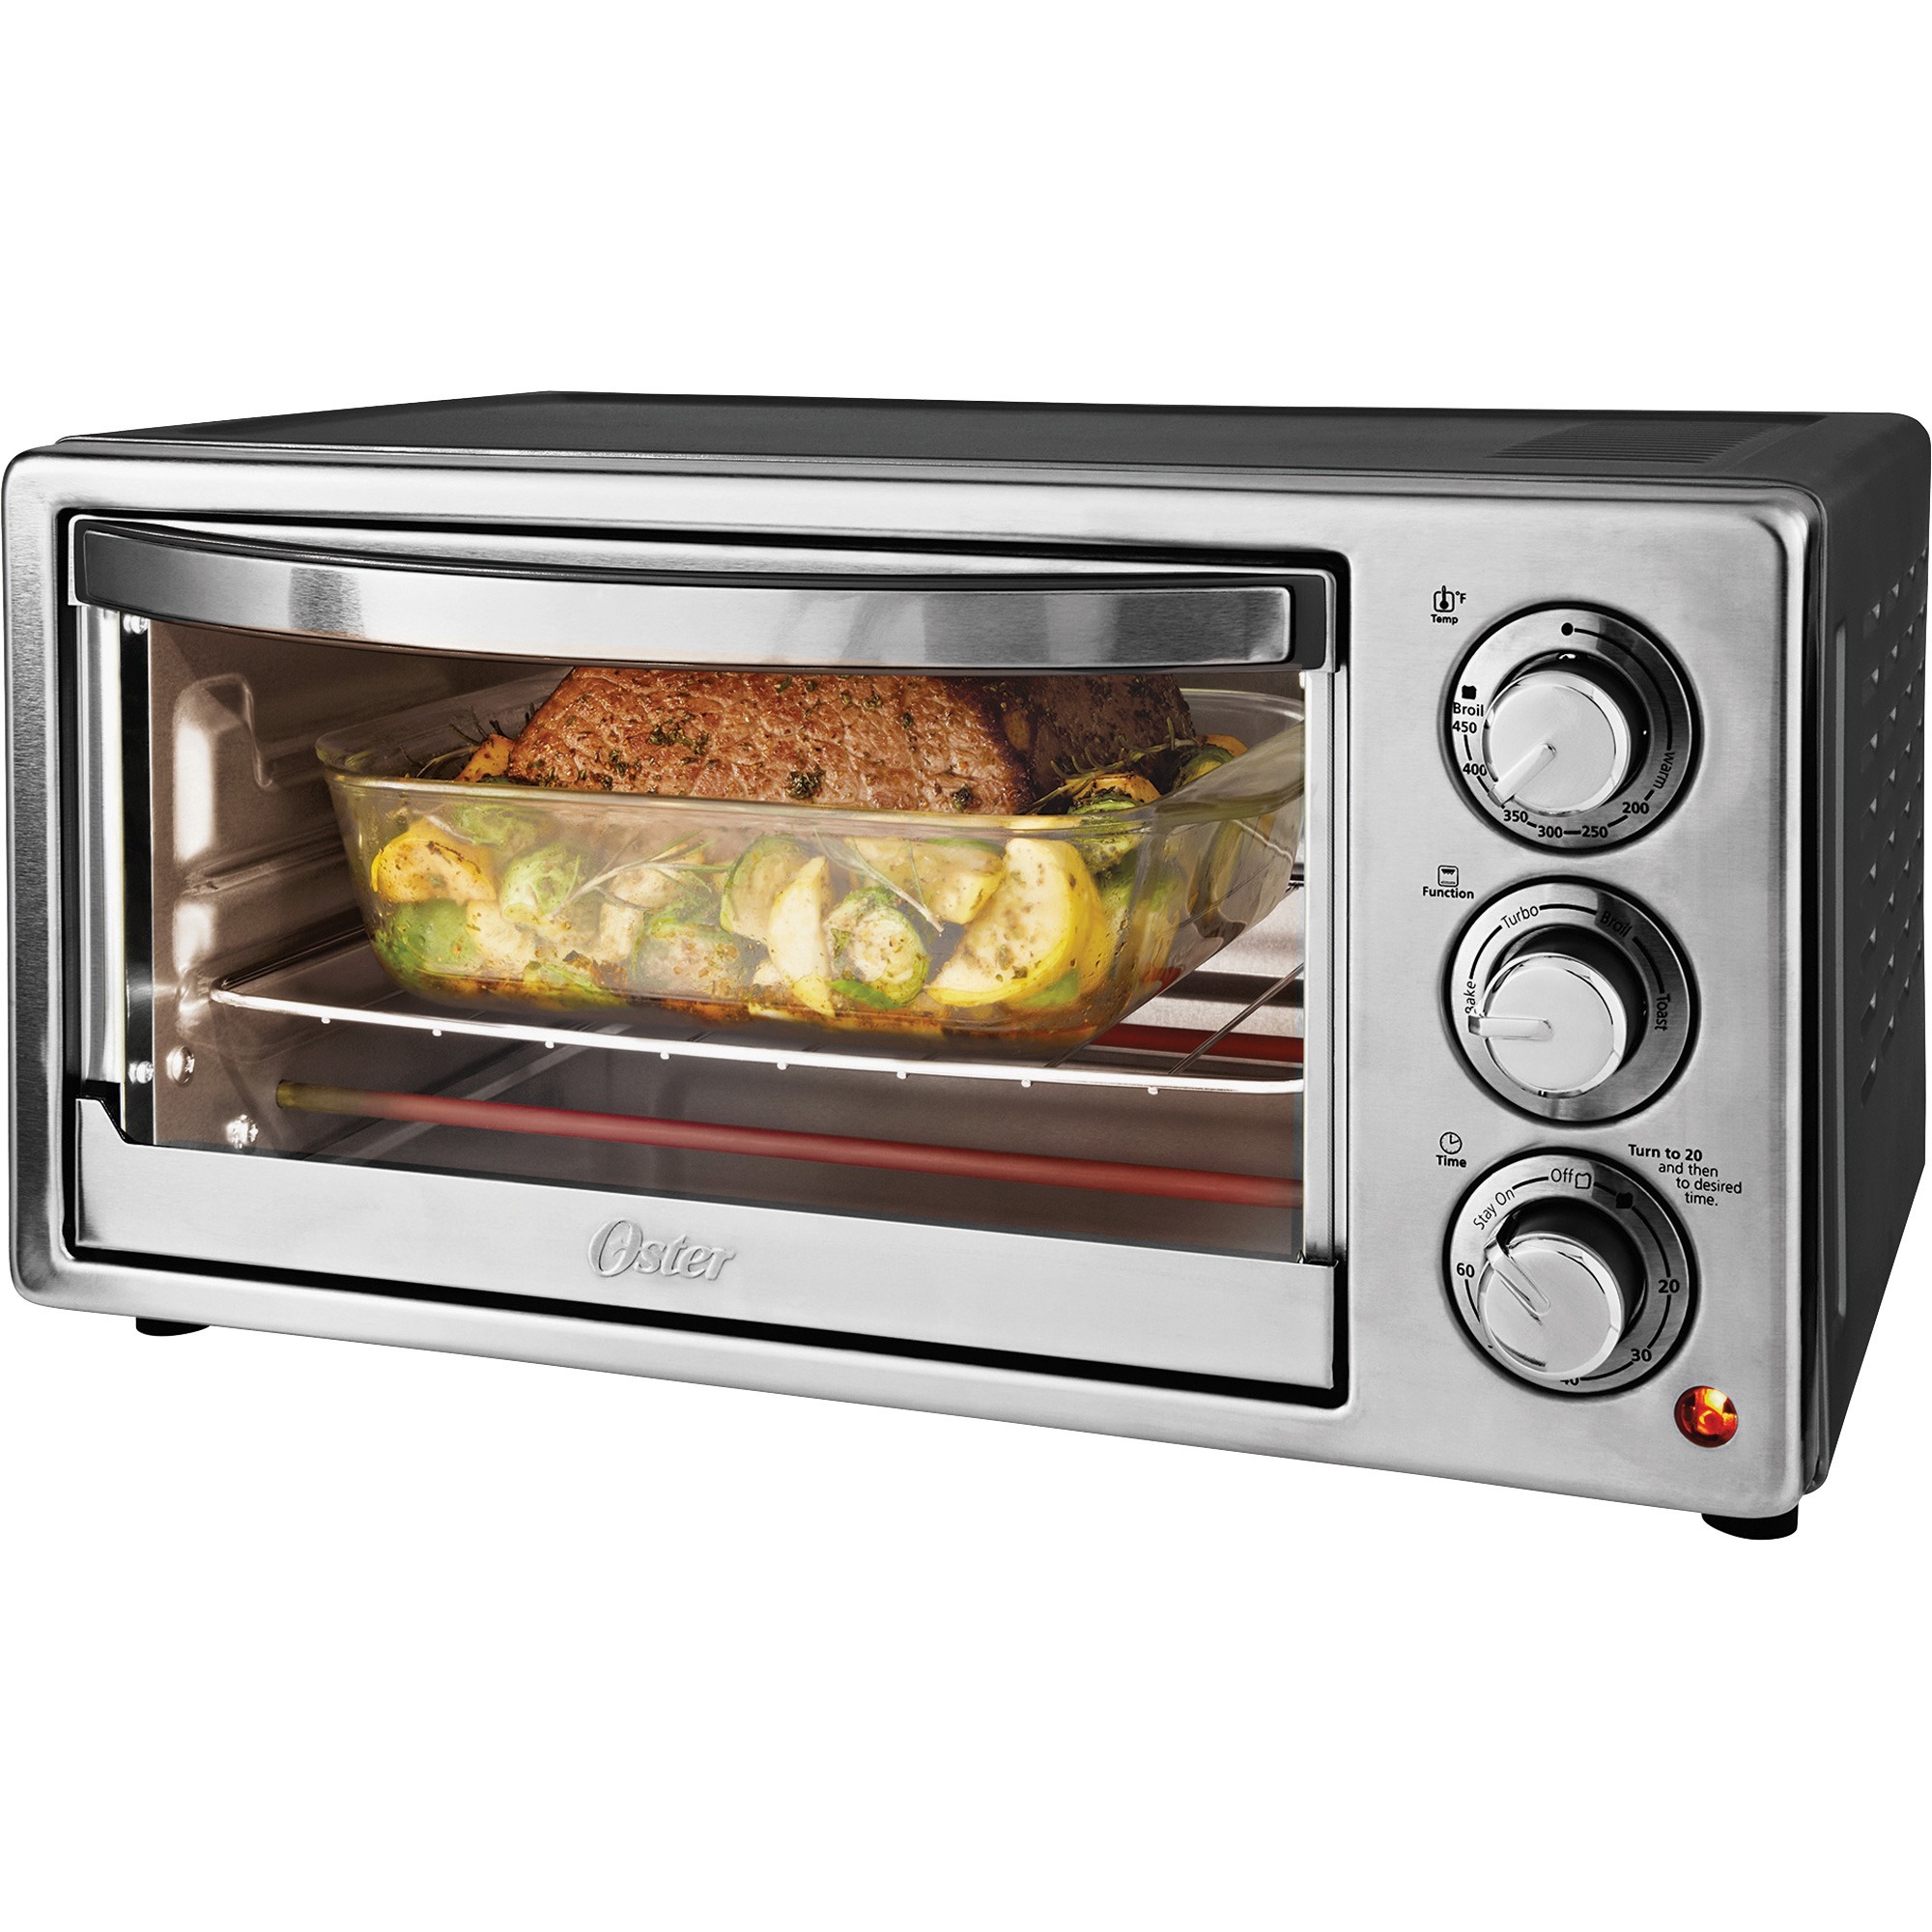 Oster, OSRTSSTTVF817, Toaster Oven, 1, Gray - image 1 of 2